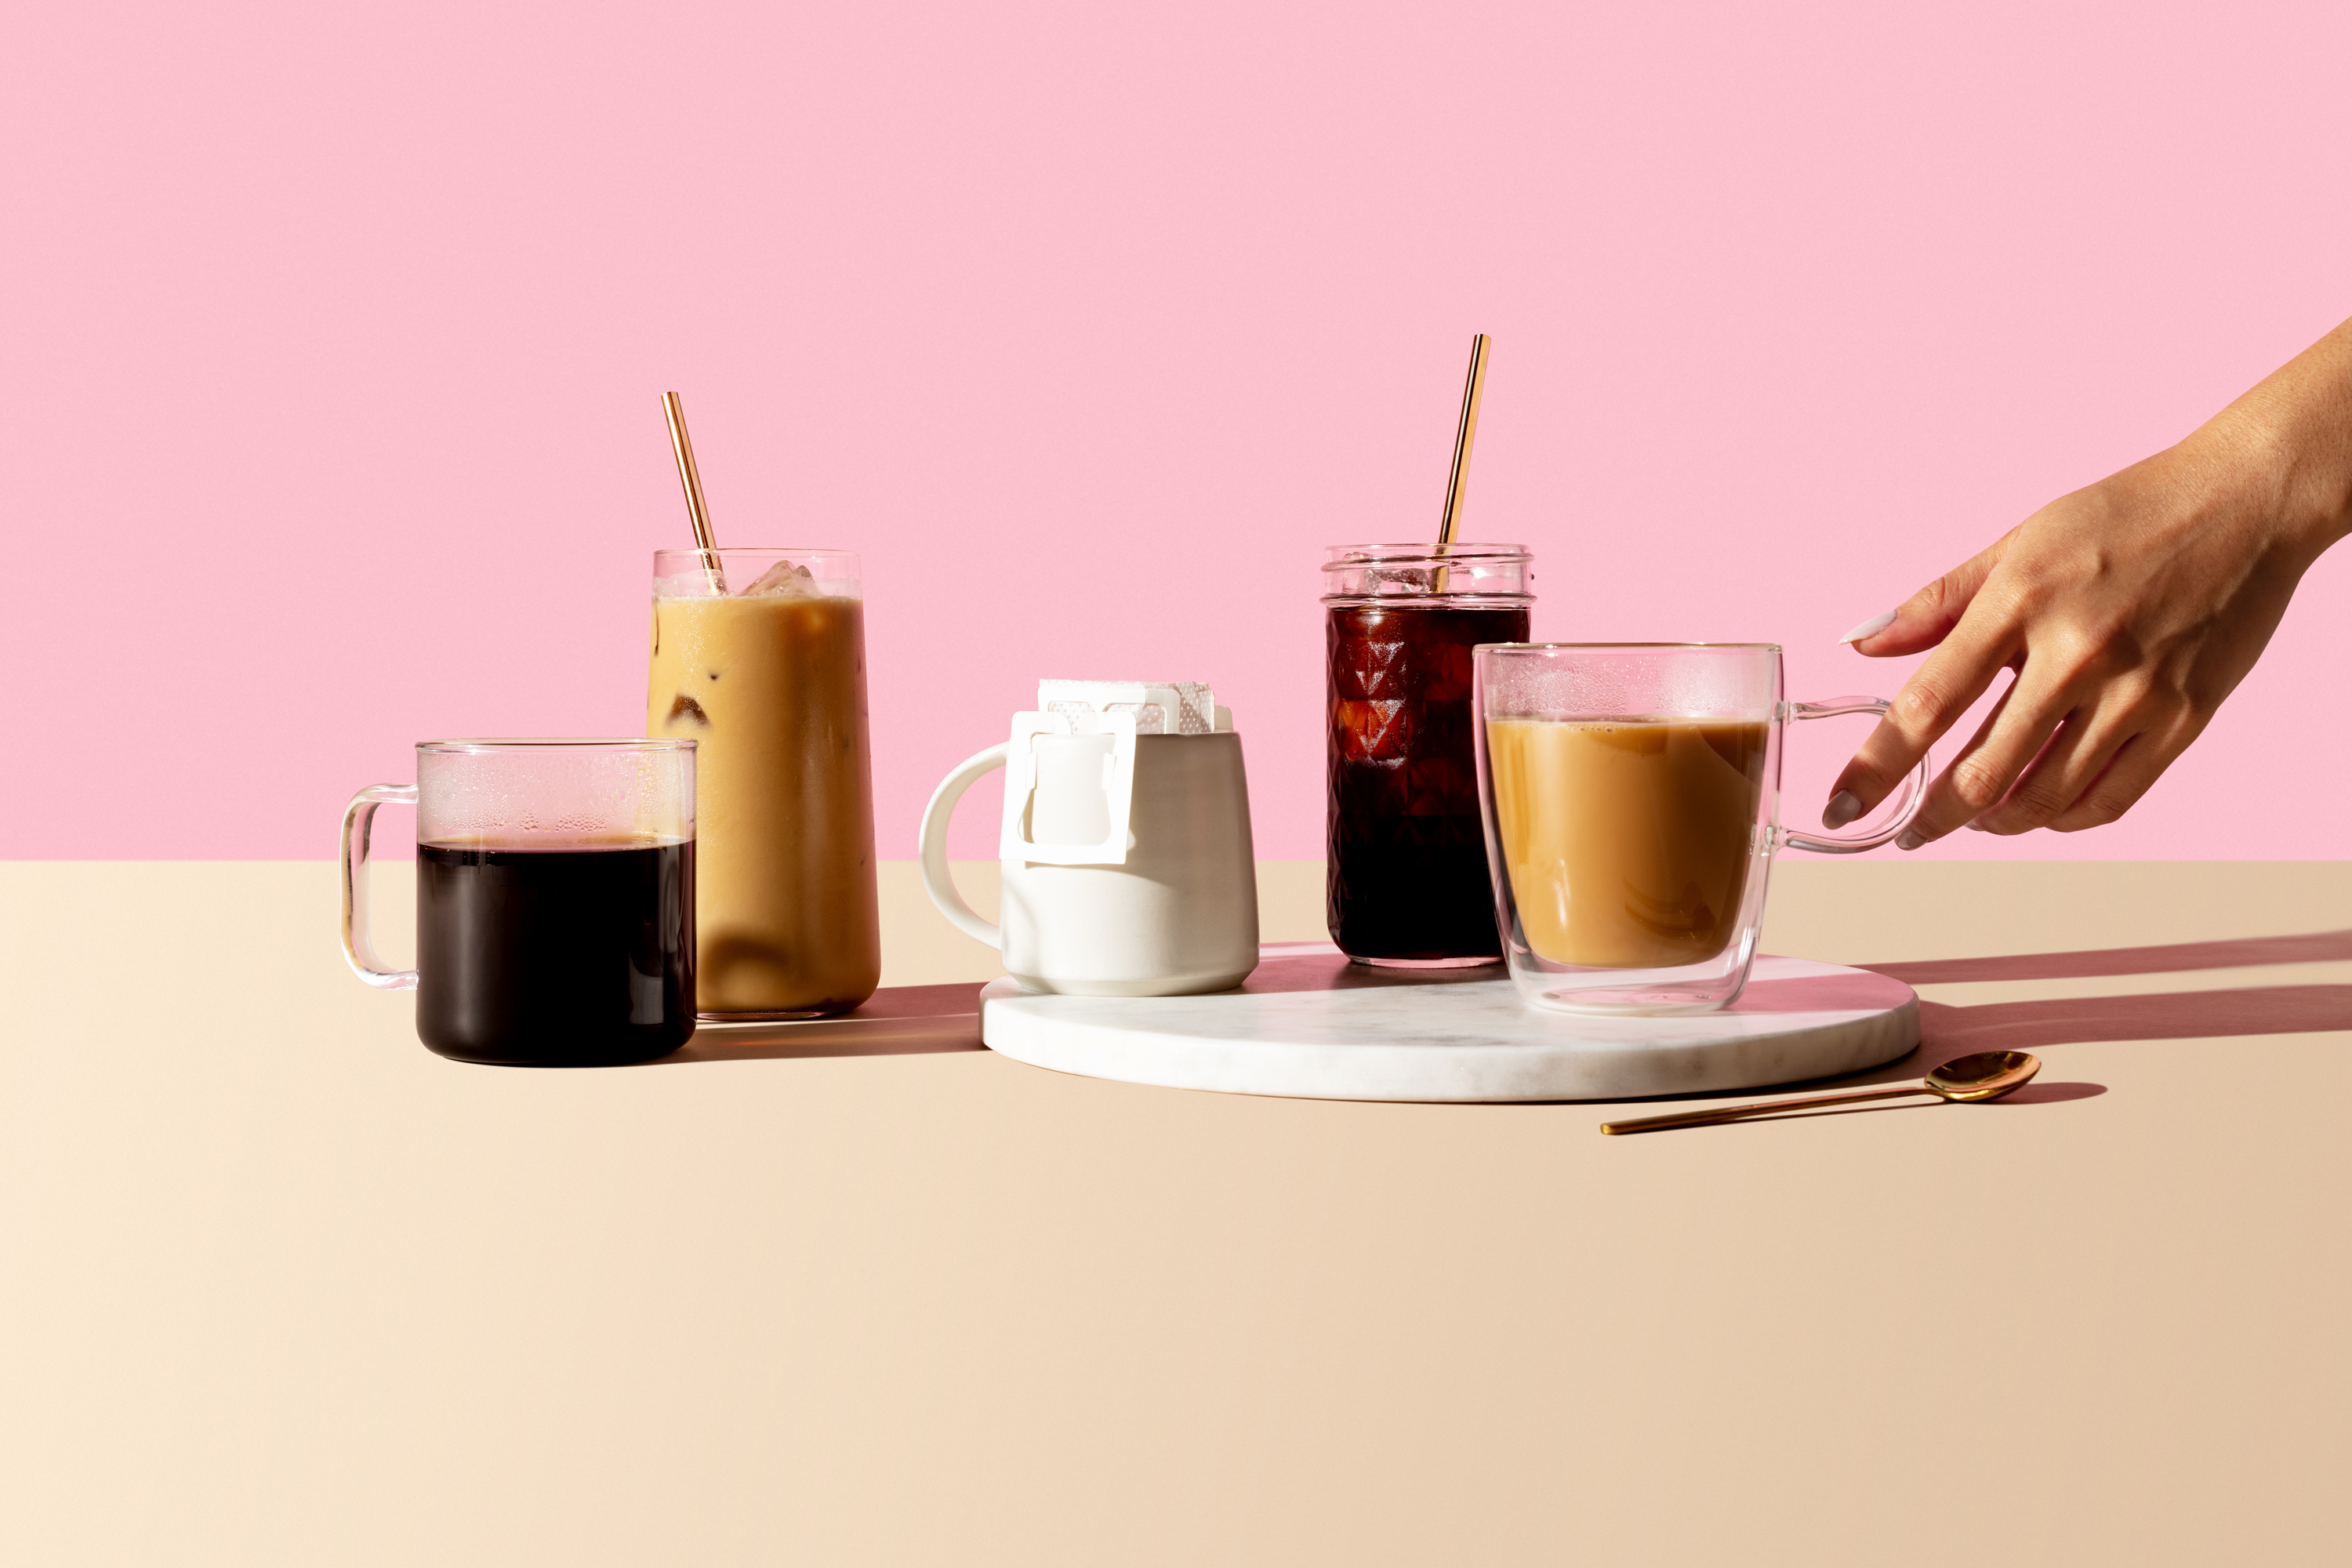 Clear glass mug with black coffee next to tall glass with iced latte and straw next to brewing coffee in white ceramic mug, next to iced black coffee with straw, next to latte in clear glass mug being picked up by a hand. 